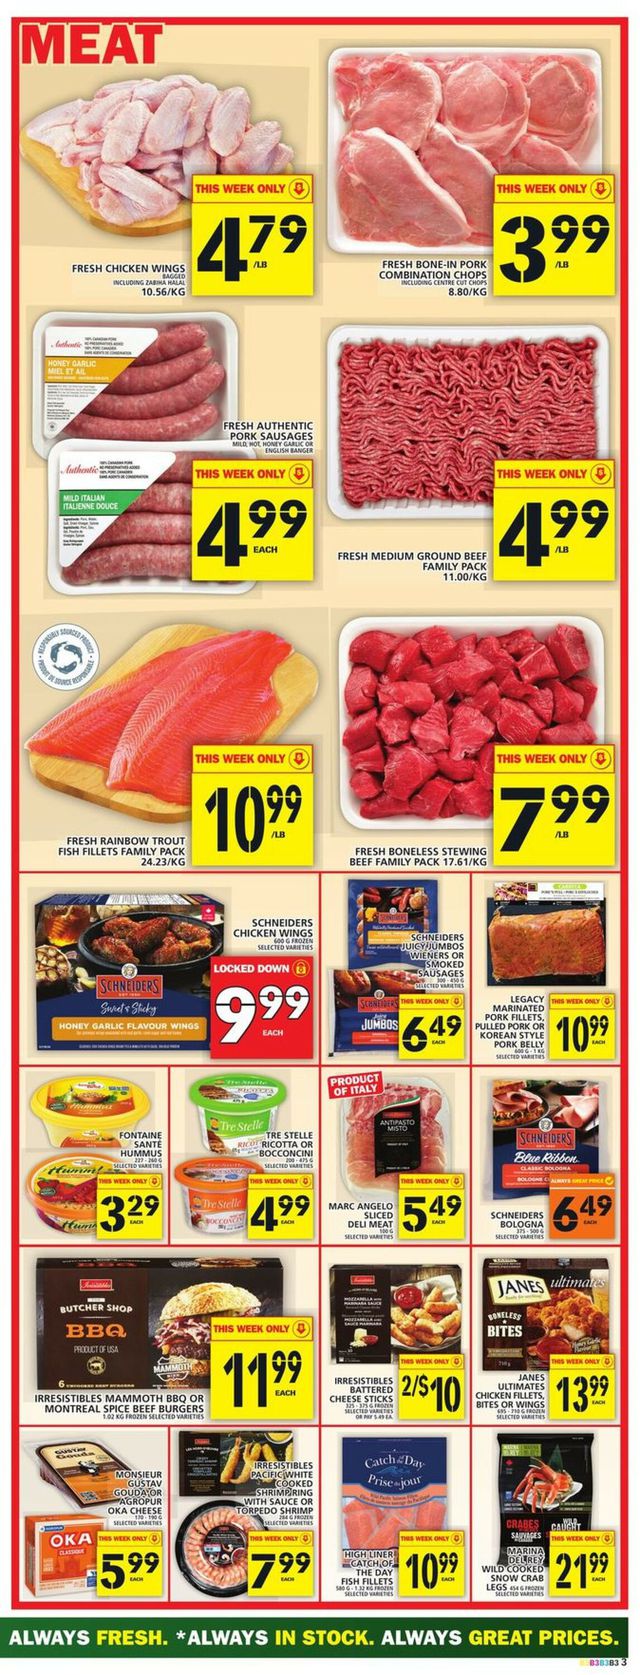 Food Basics Flyer from 02/09/2023